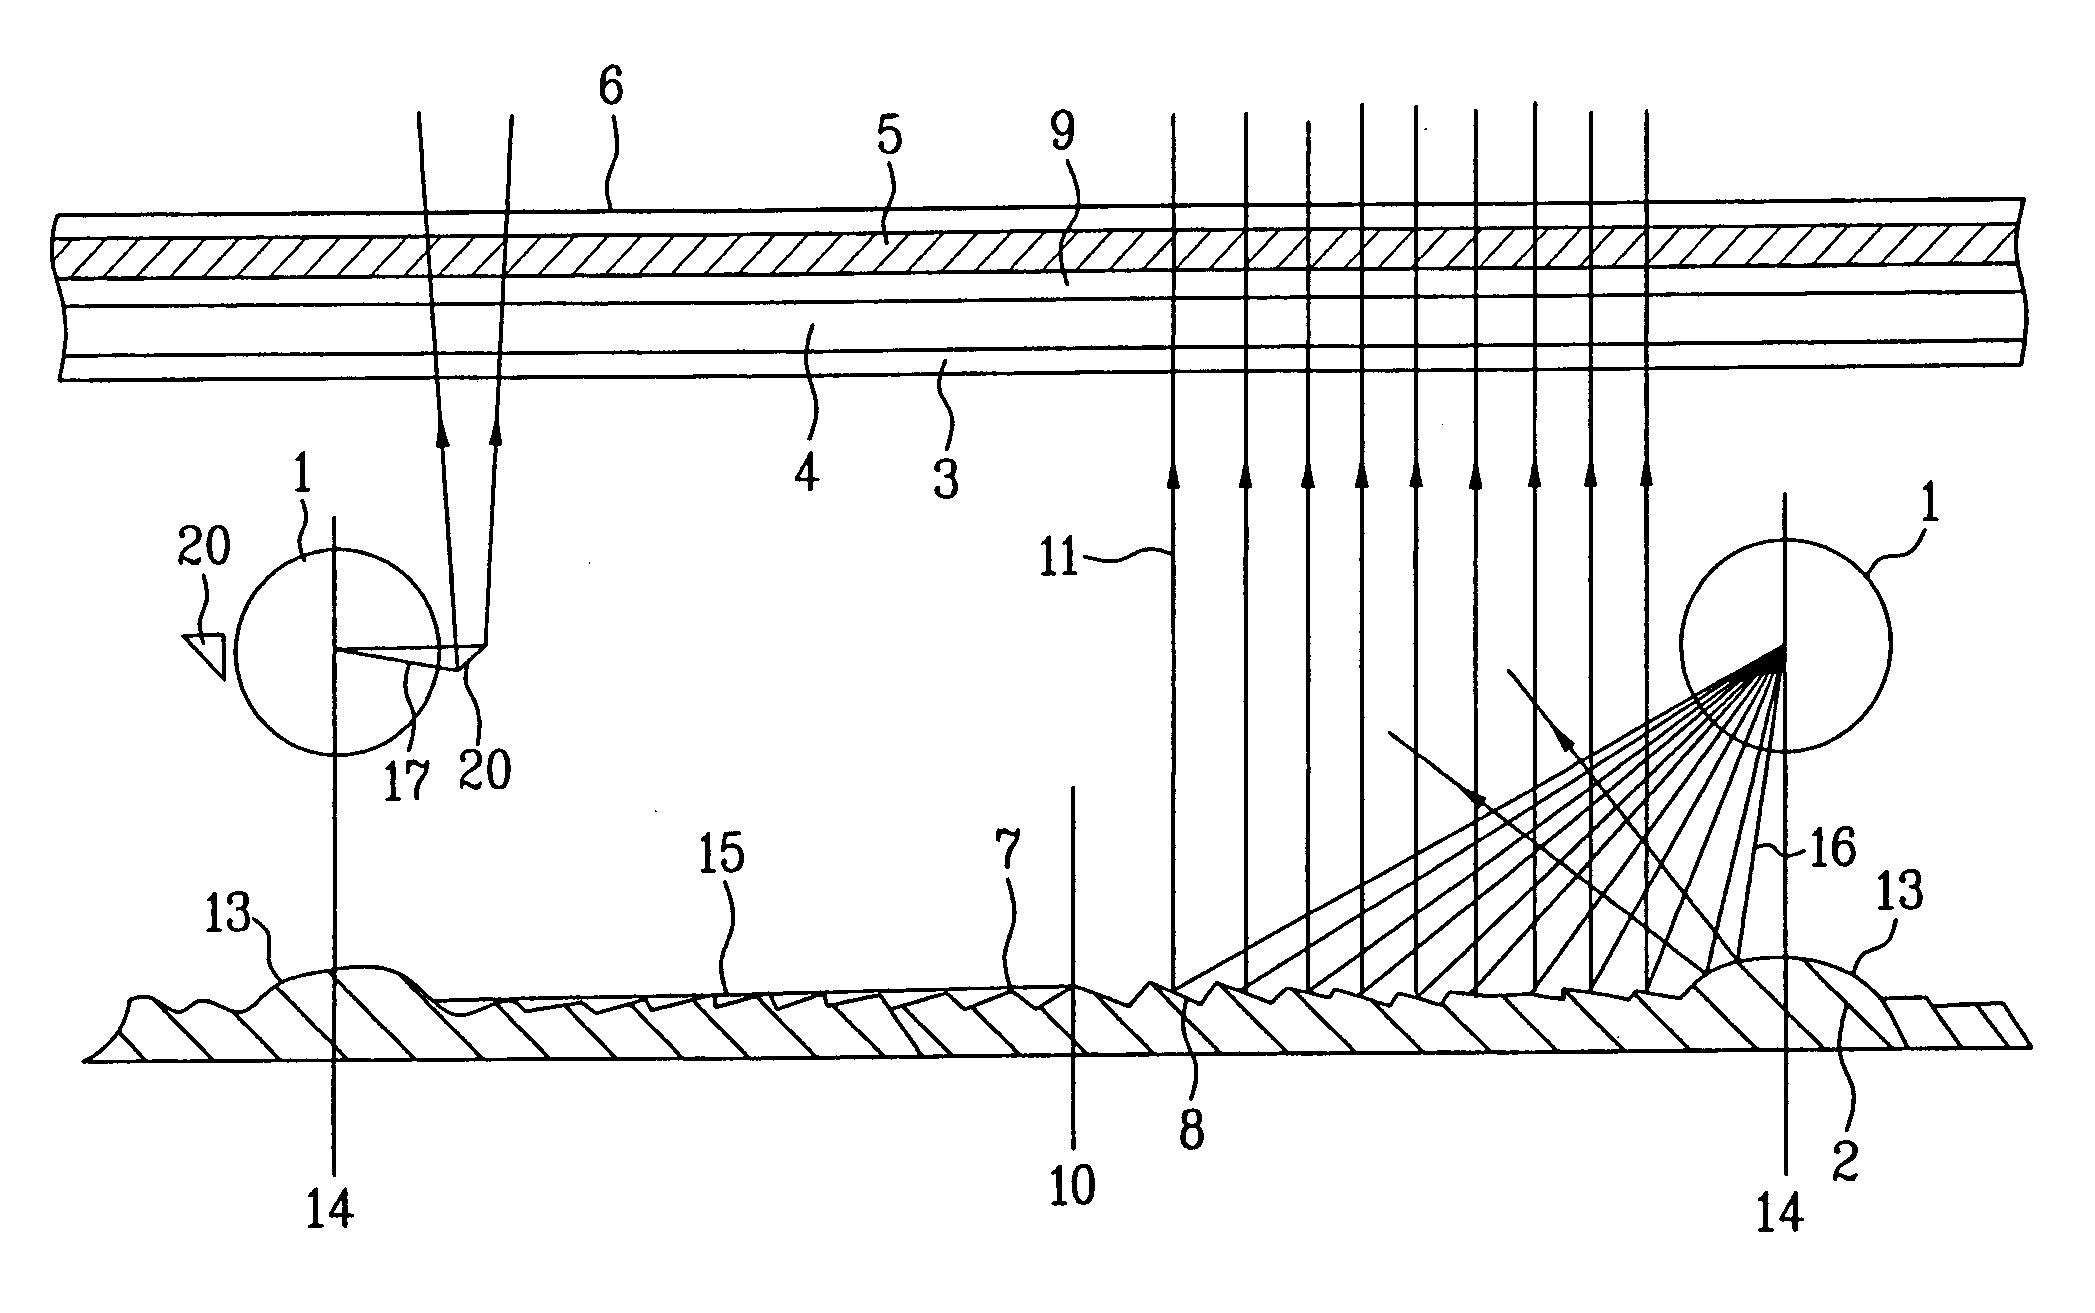 Backlight unit of liquid crystal display device and reflective means therein